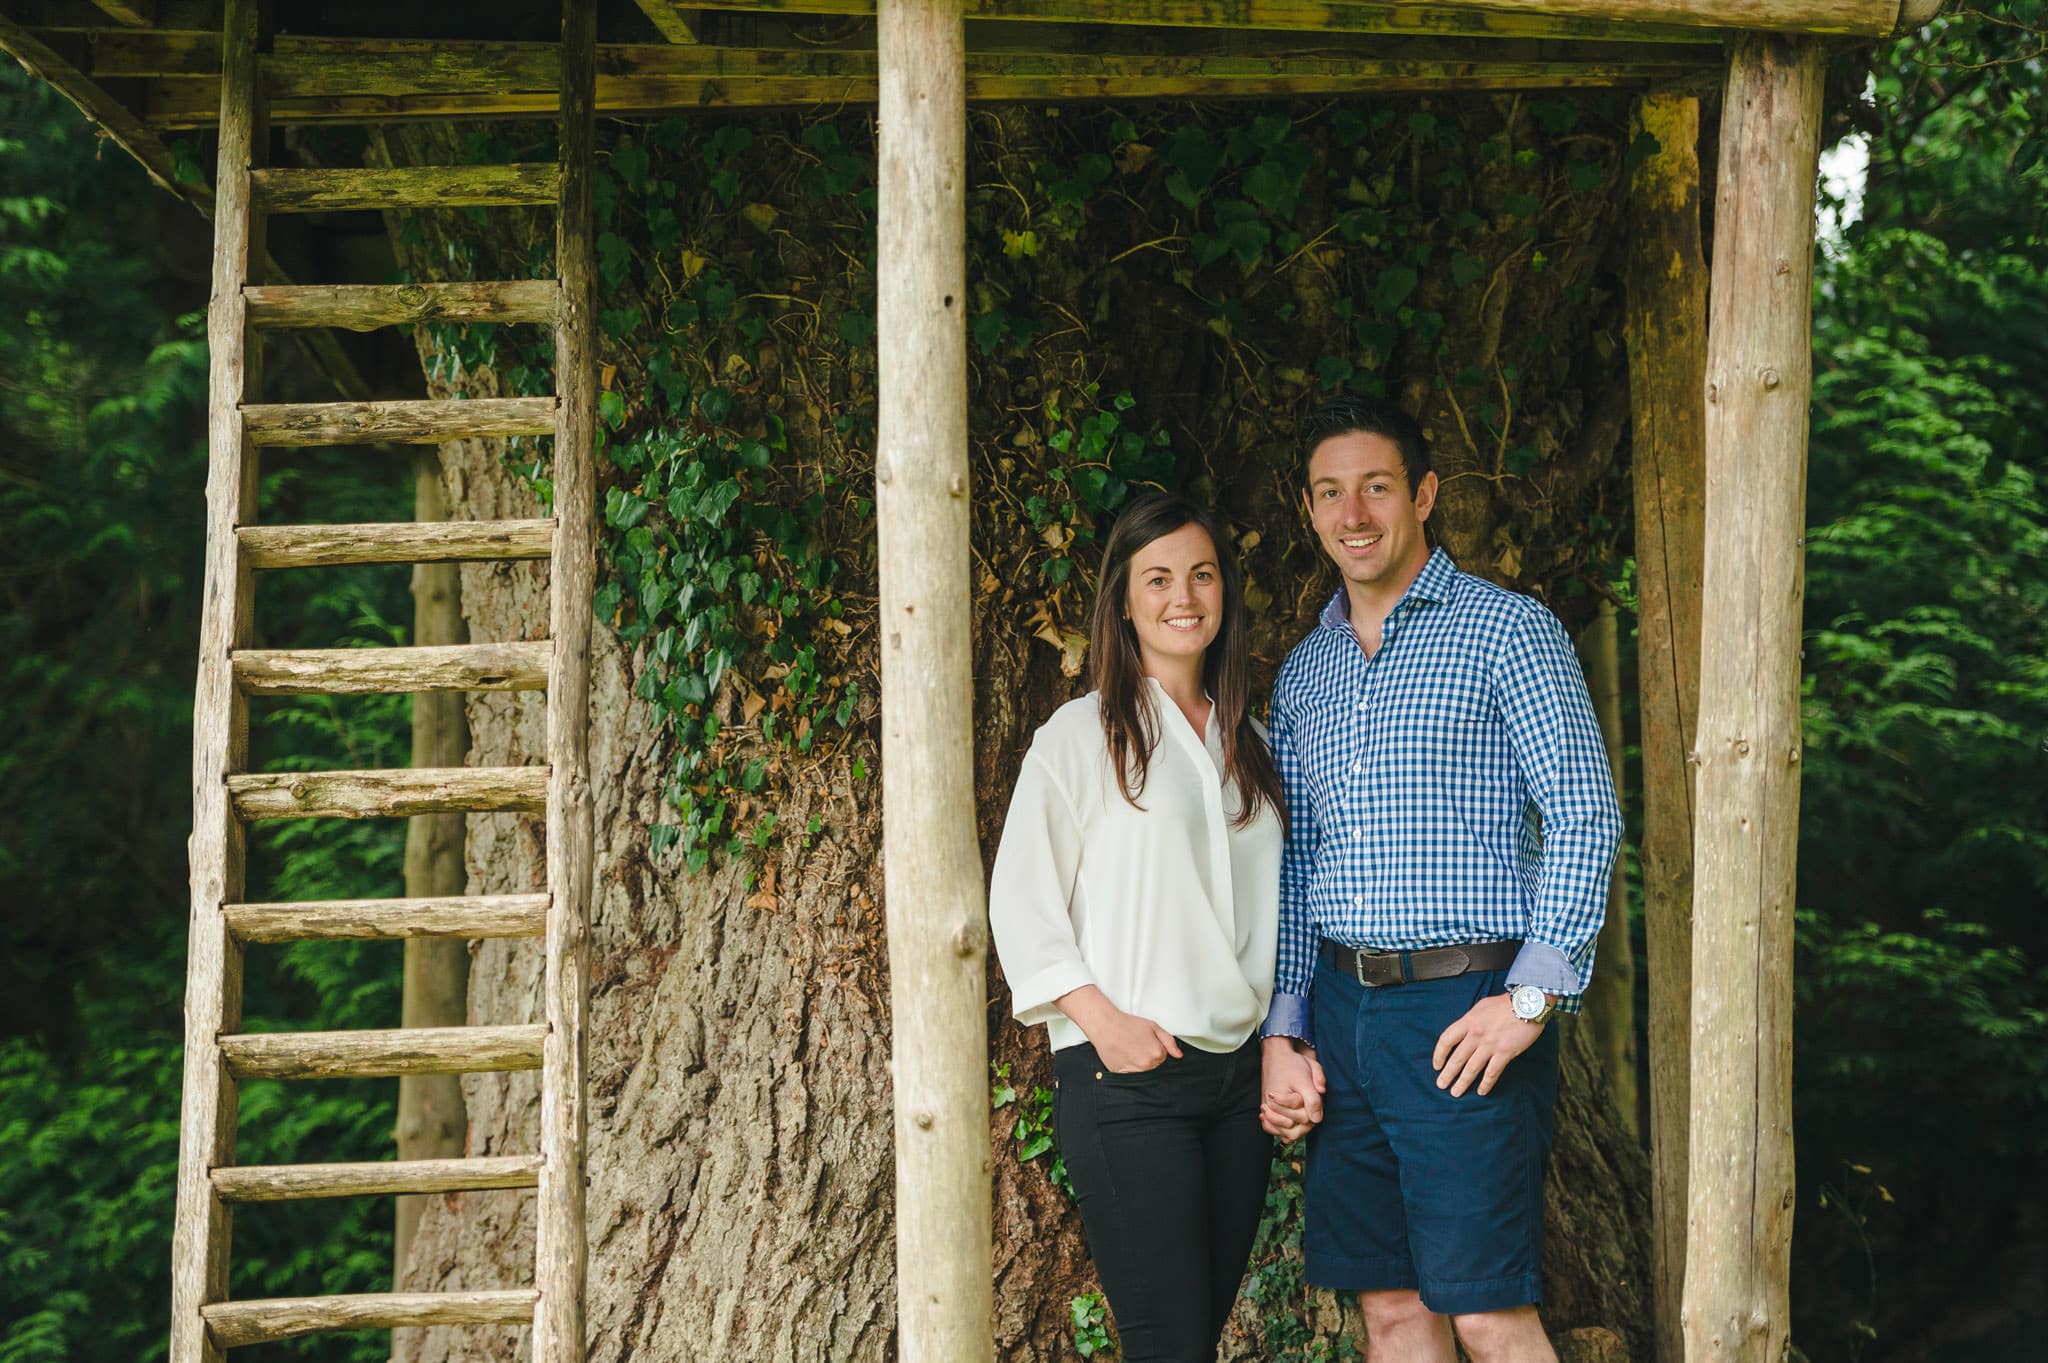 Dean + Sarah's pre wedding photography session in Herefordshire, West Midlands 3